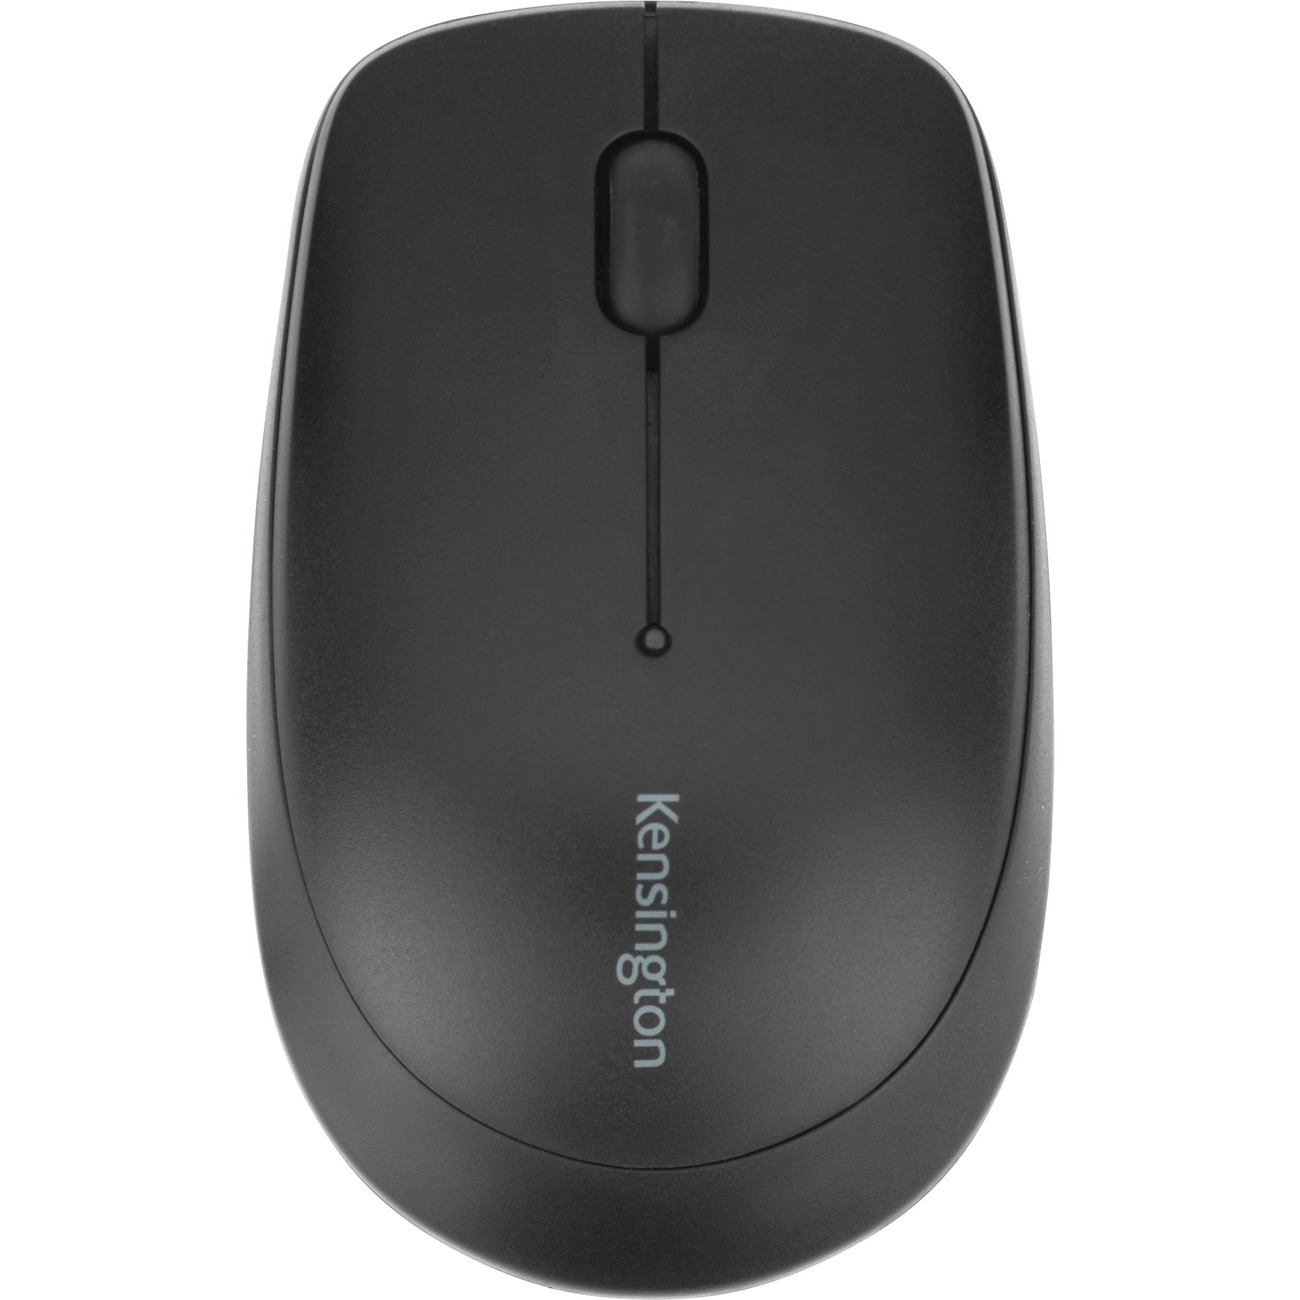 wireless optical mouse jumping around screen